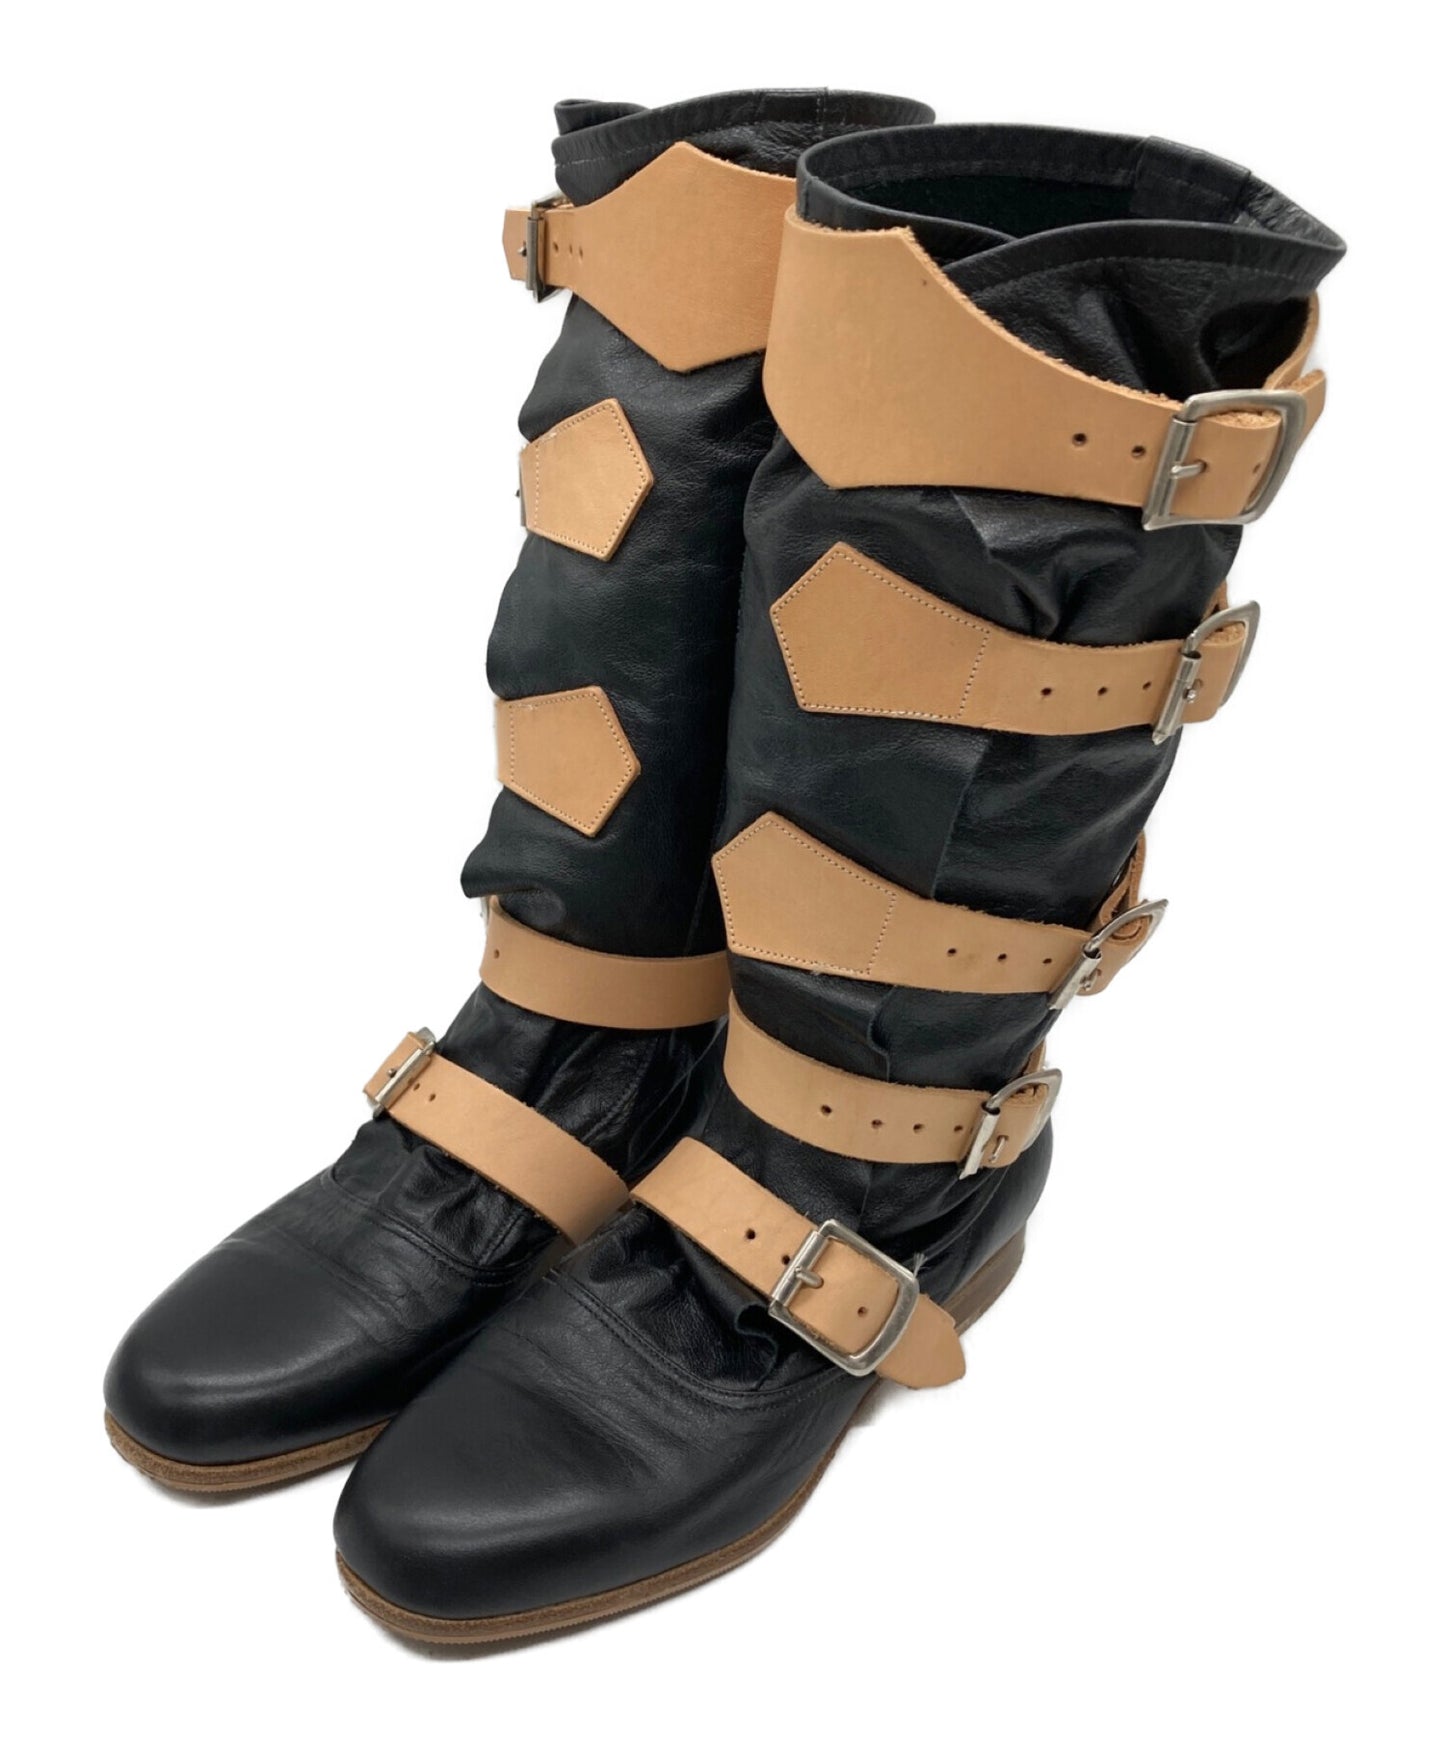 Vivienne Westwood pirate boots